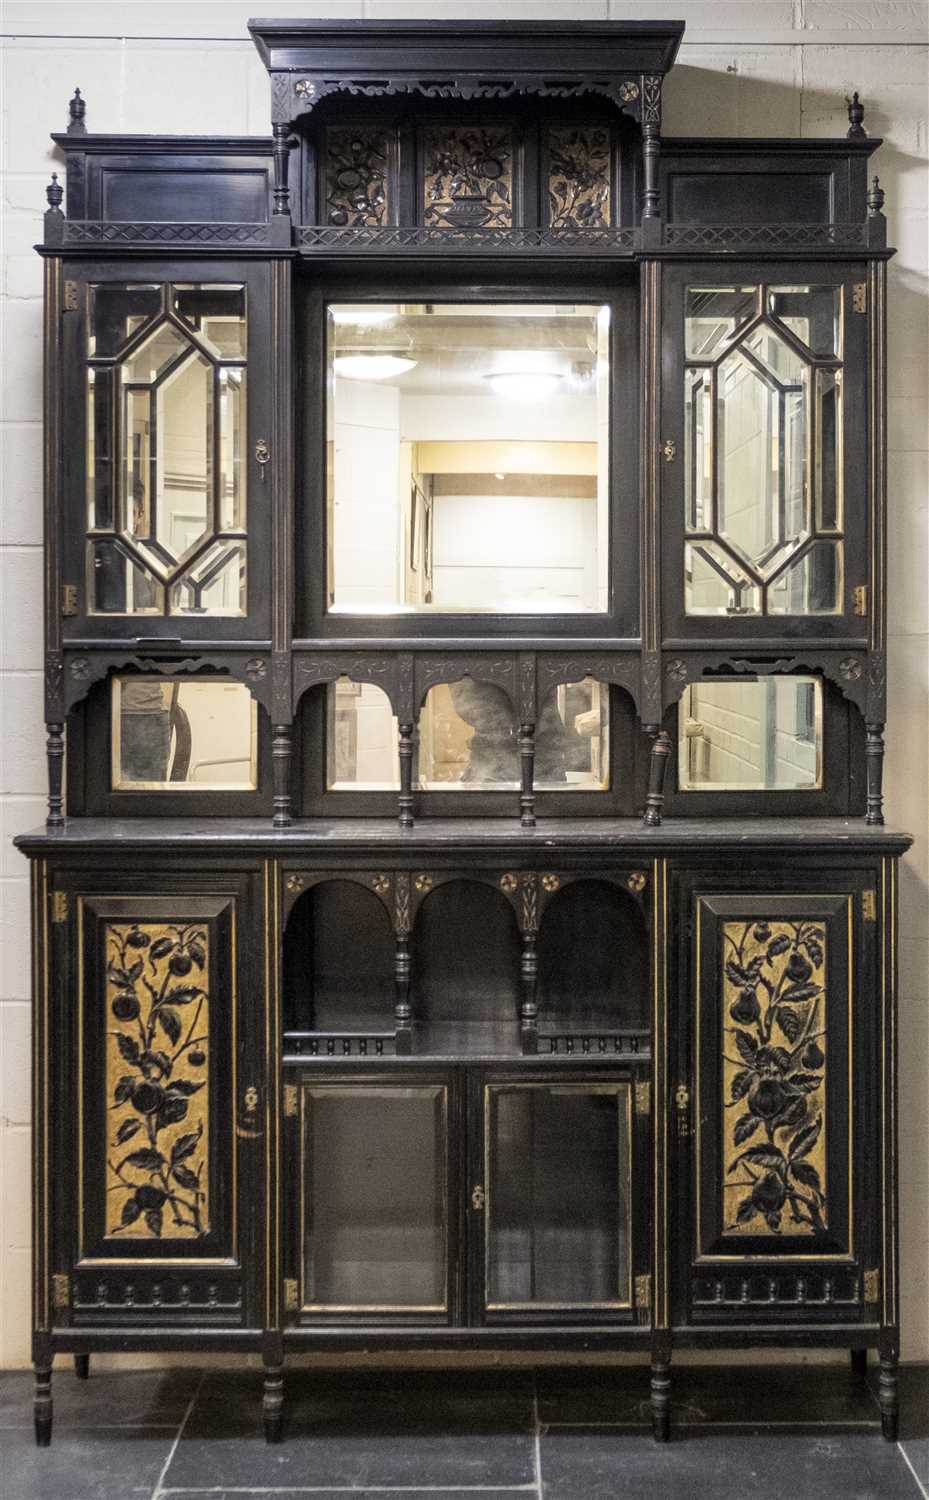 Lot 132 - Sideboard. A Victorian Aesthetic period mirror-back sideboard